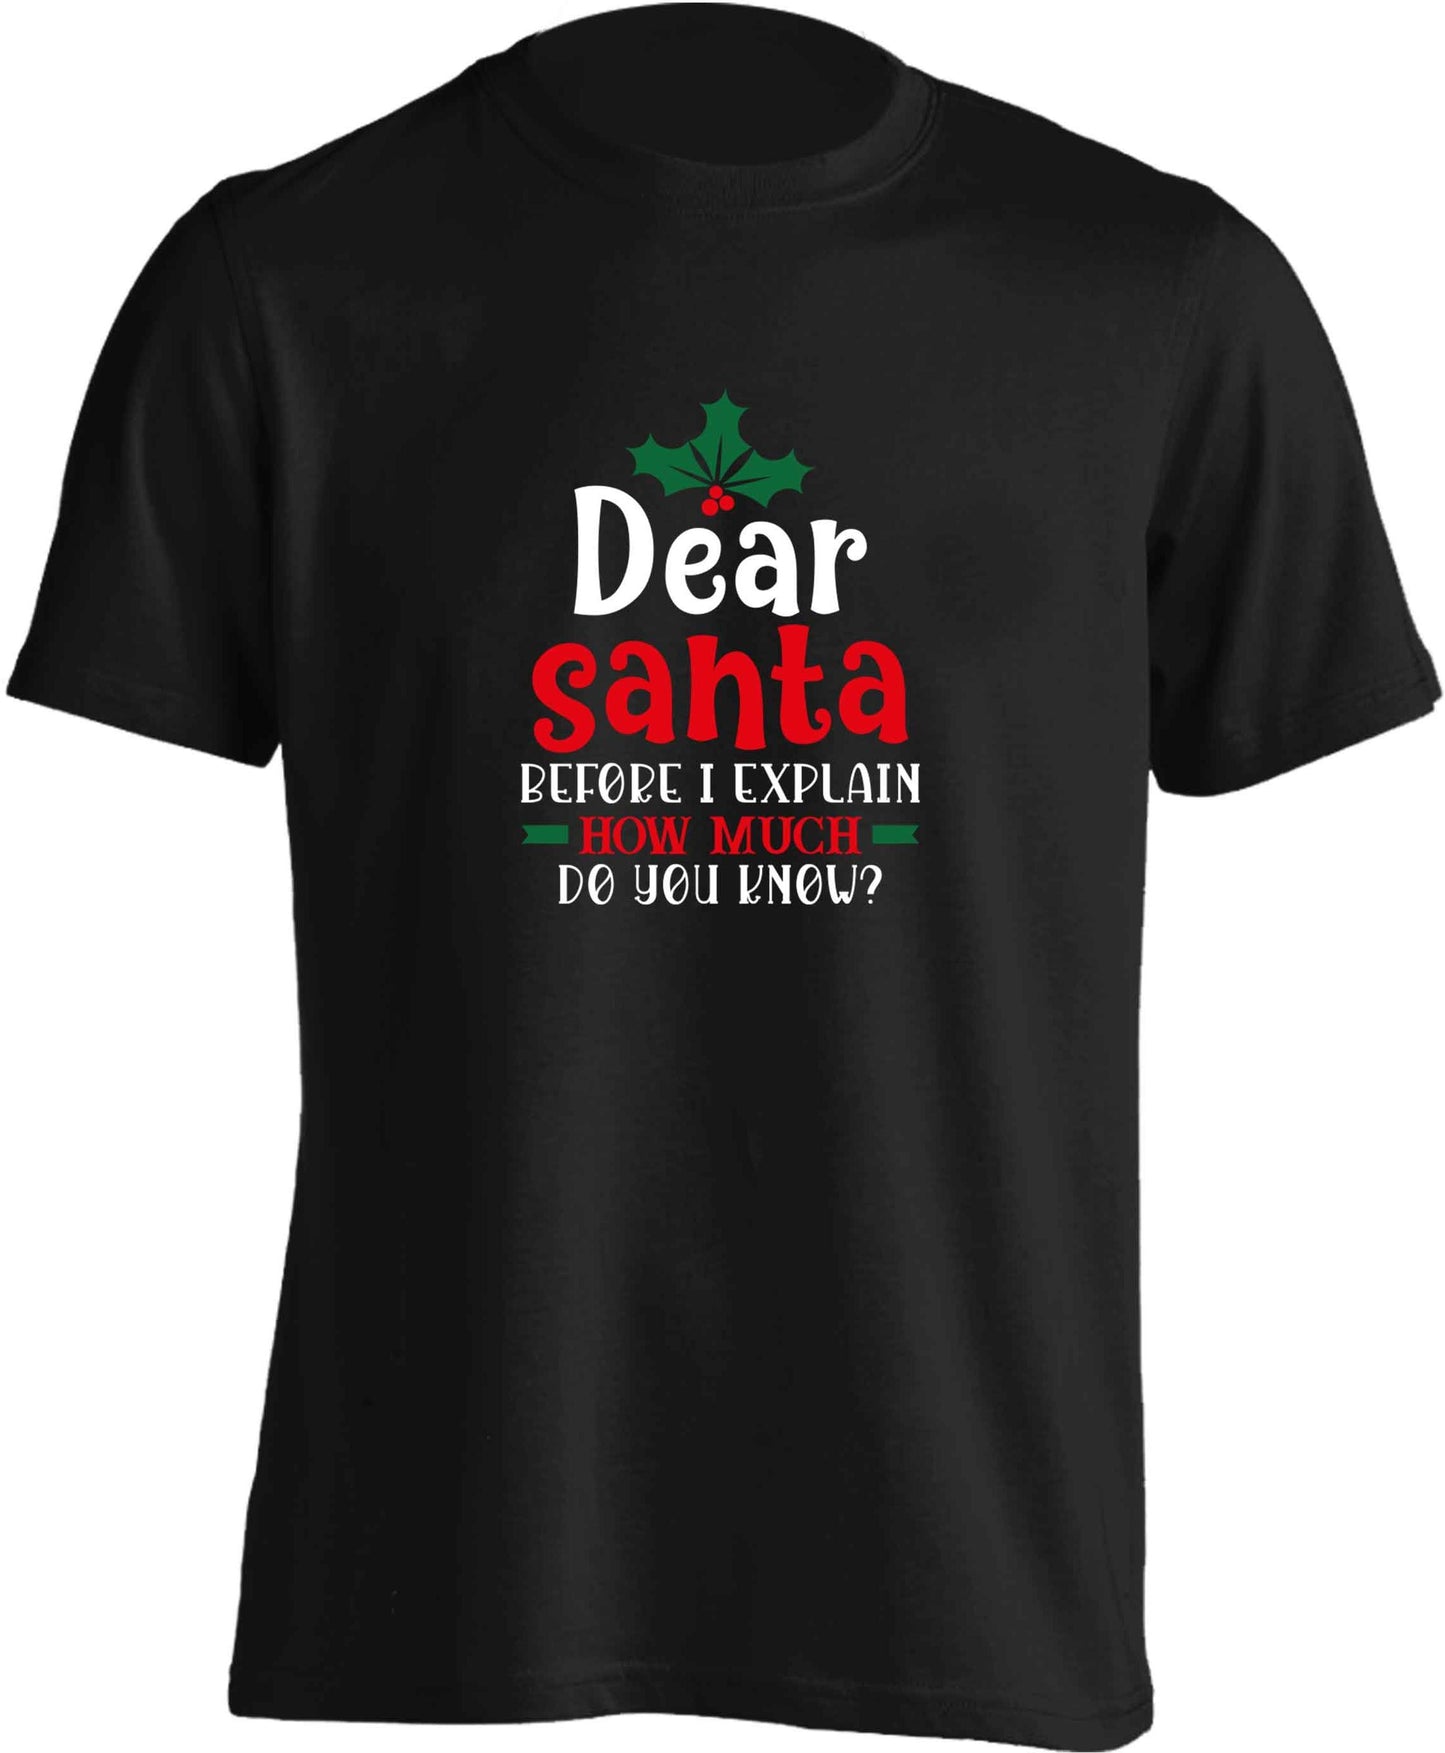 Santa before I explain how much do you know? adults unisex black Tshirt 2XL